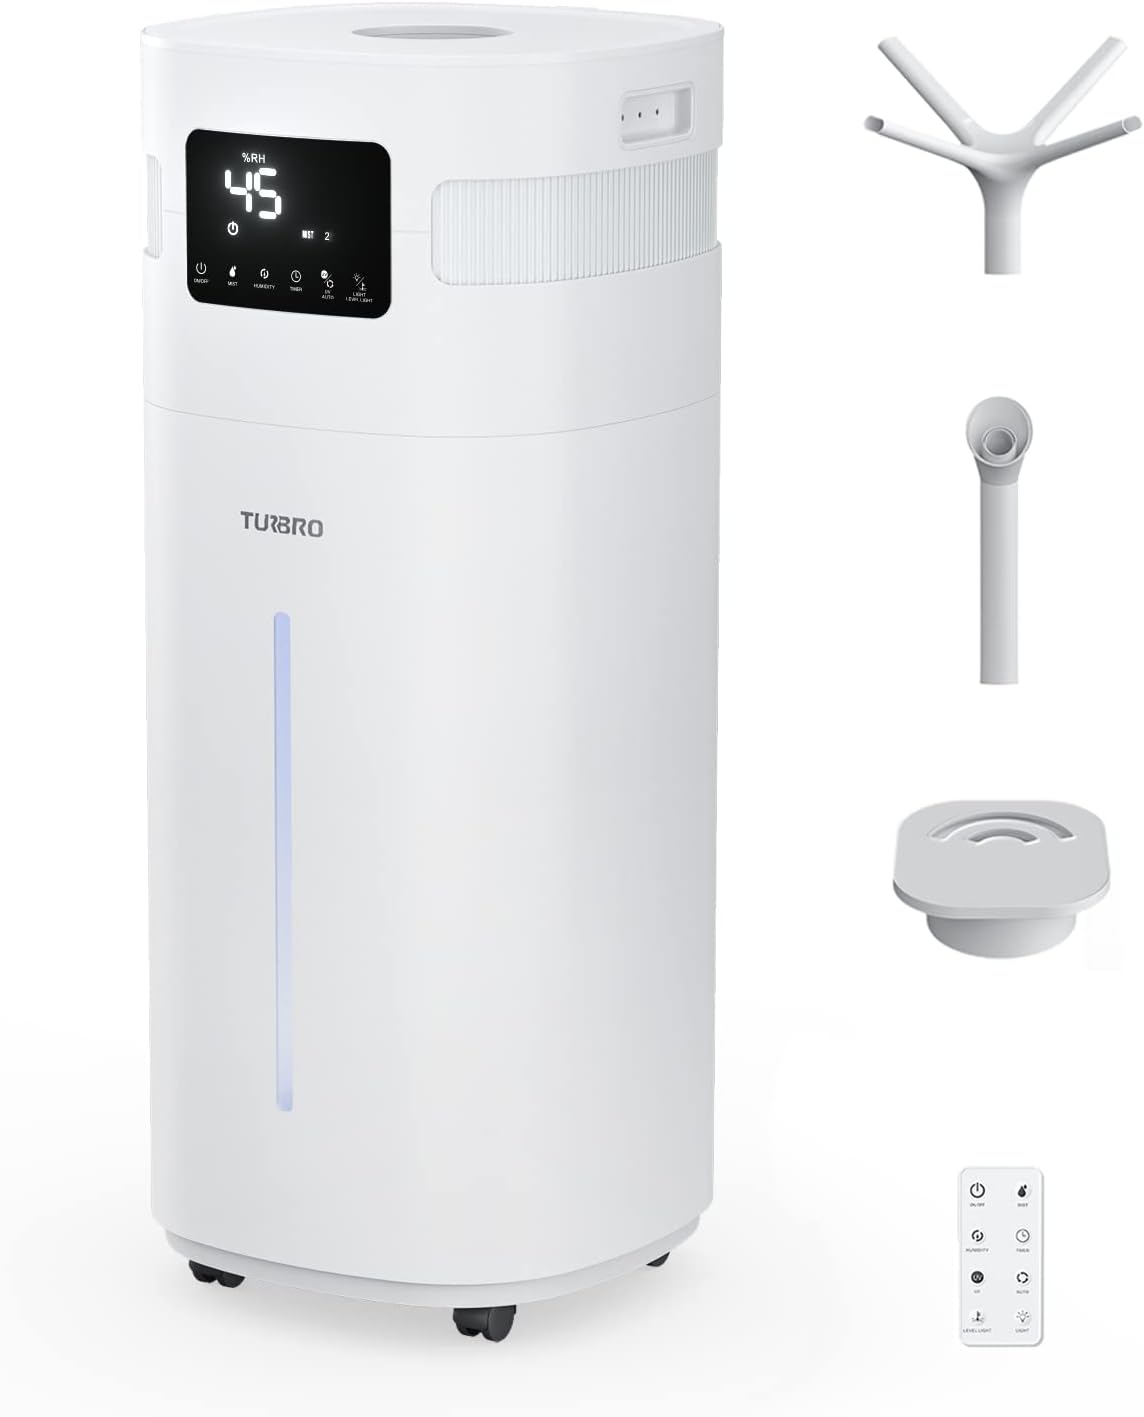 TURBRO 5.3 Gal Commercial Humidifier for Large Rooms up to 2000 Sq Ft, Top Refill, with UV-C LED for Whole House, Office